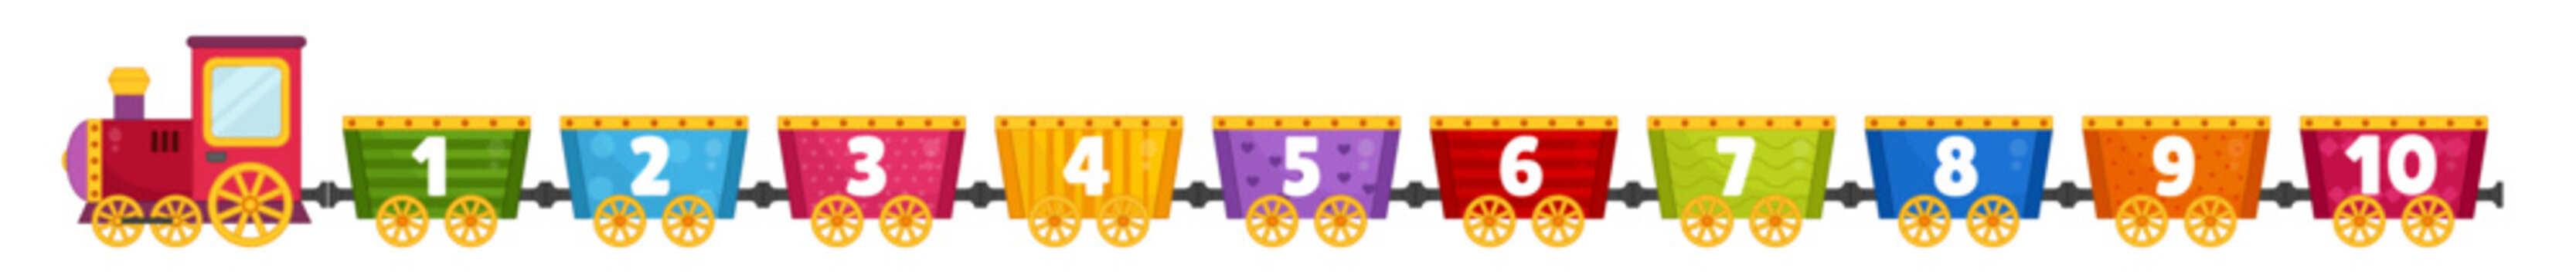 Vector illustration of a cartoon steam locomotive carries multi-colored wagons with numbers.
